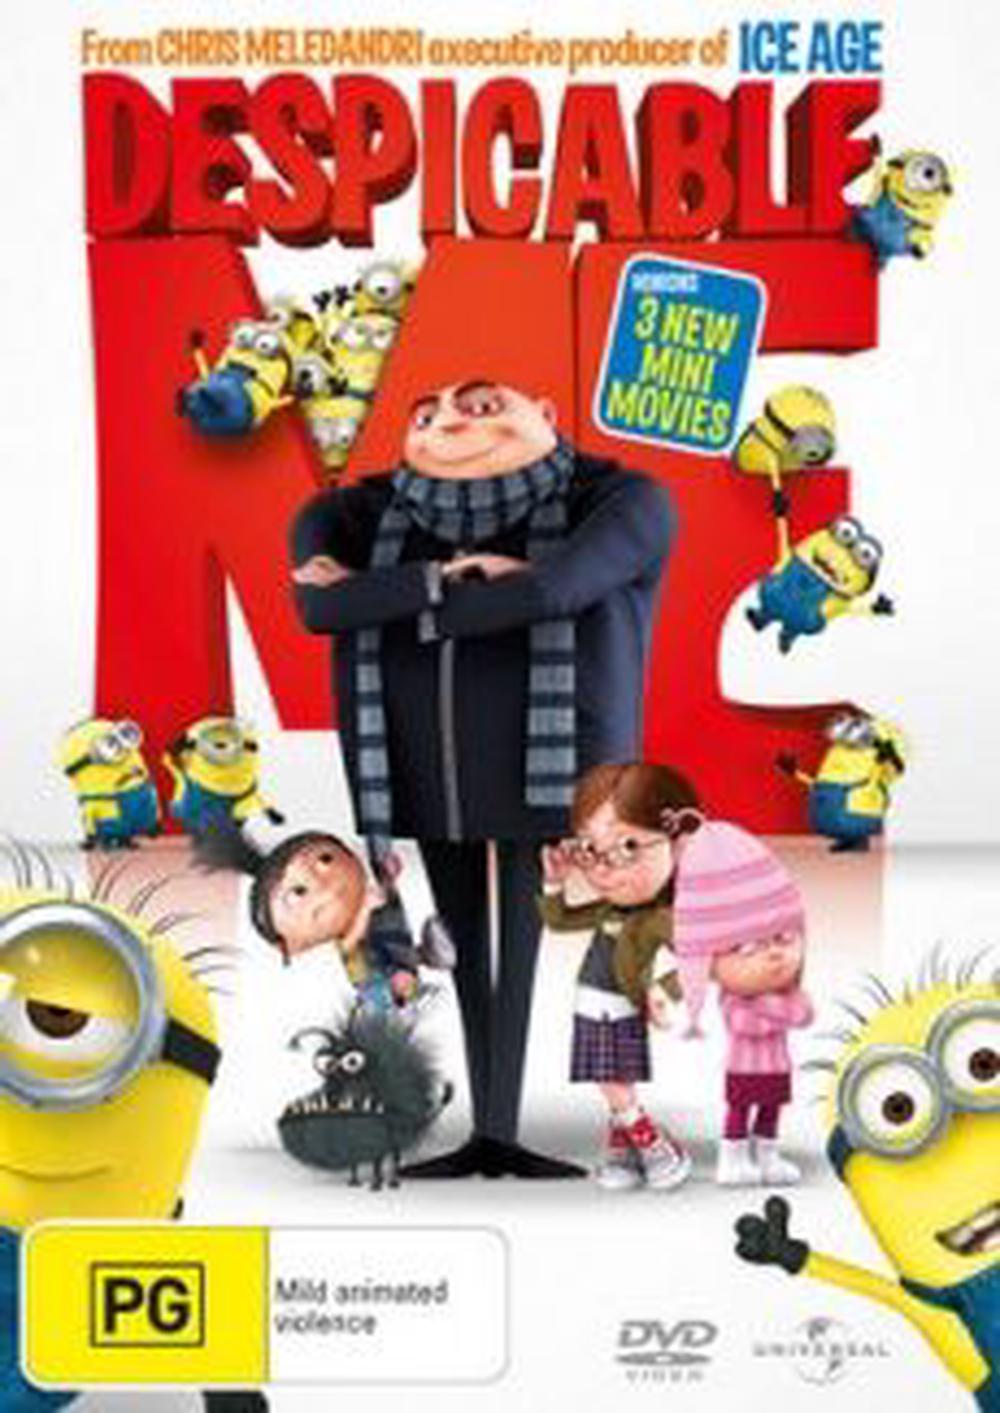 Despicable Me - DVD Region 4 Free Shipping! 5050582812756 | eBay